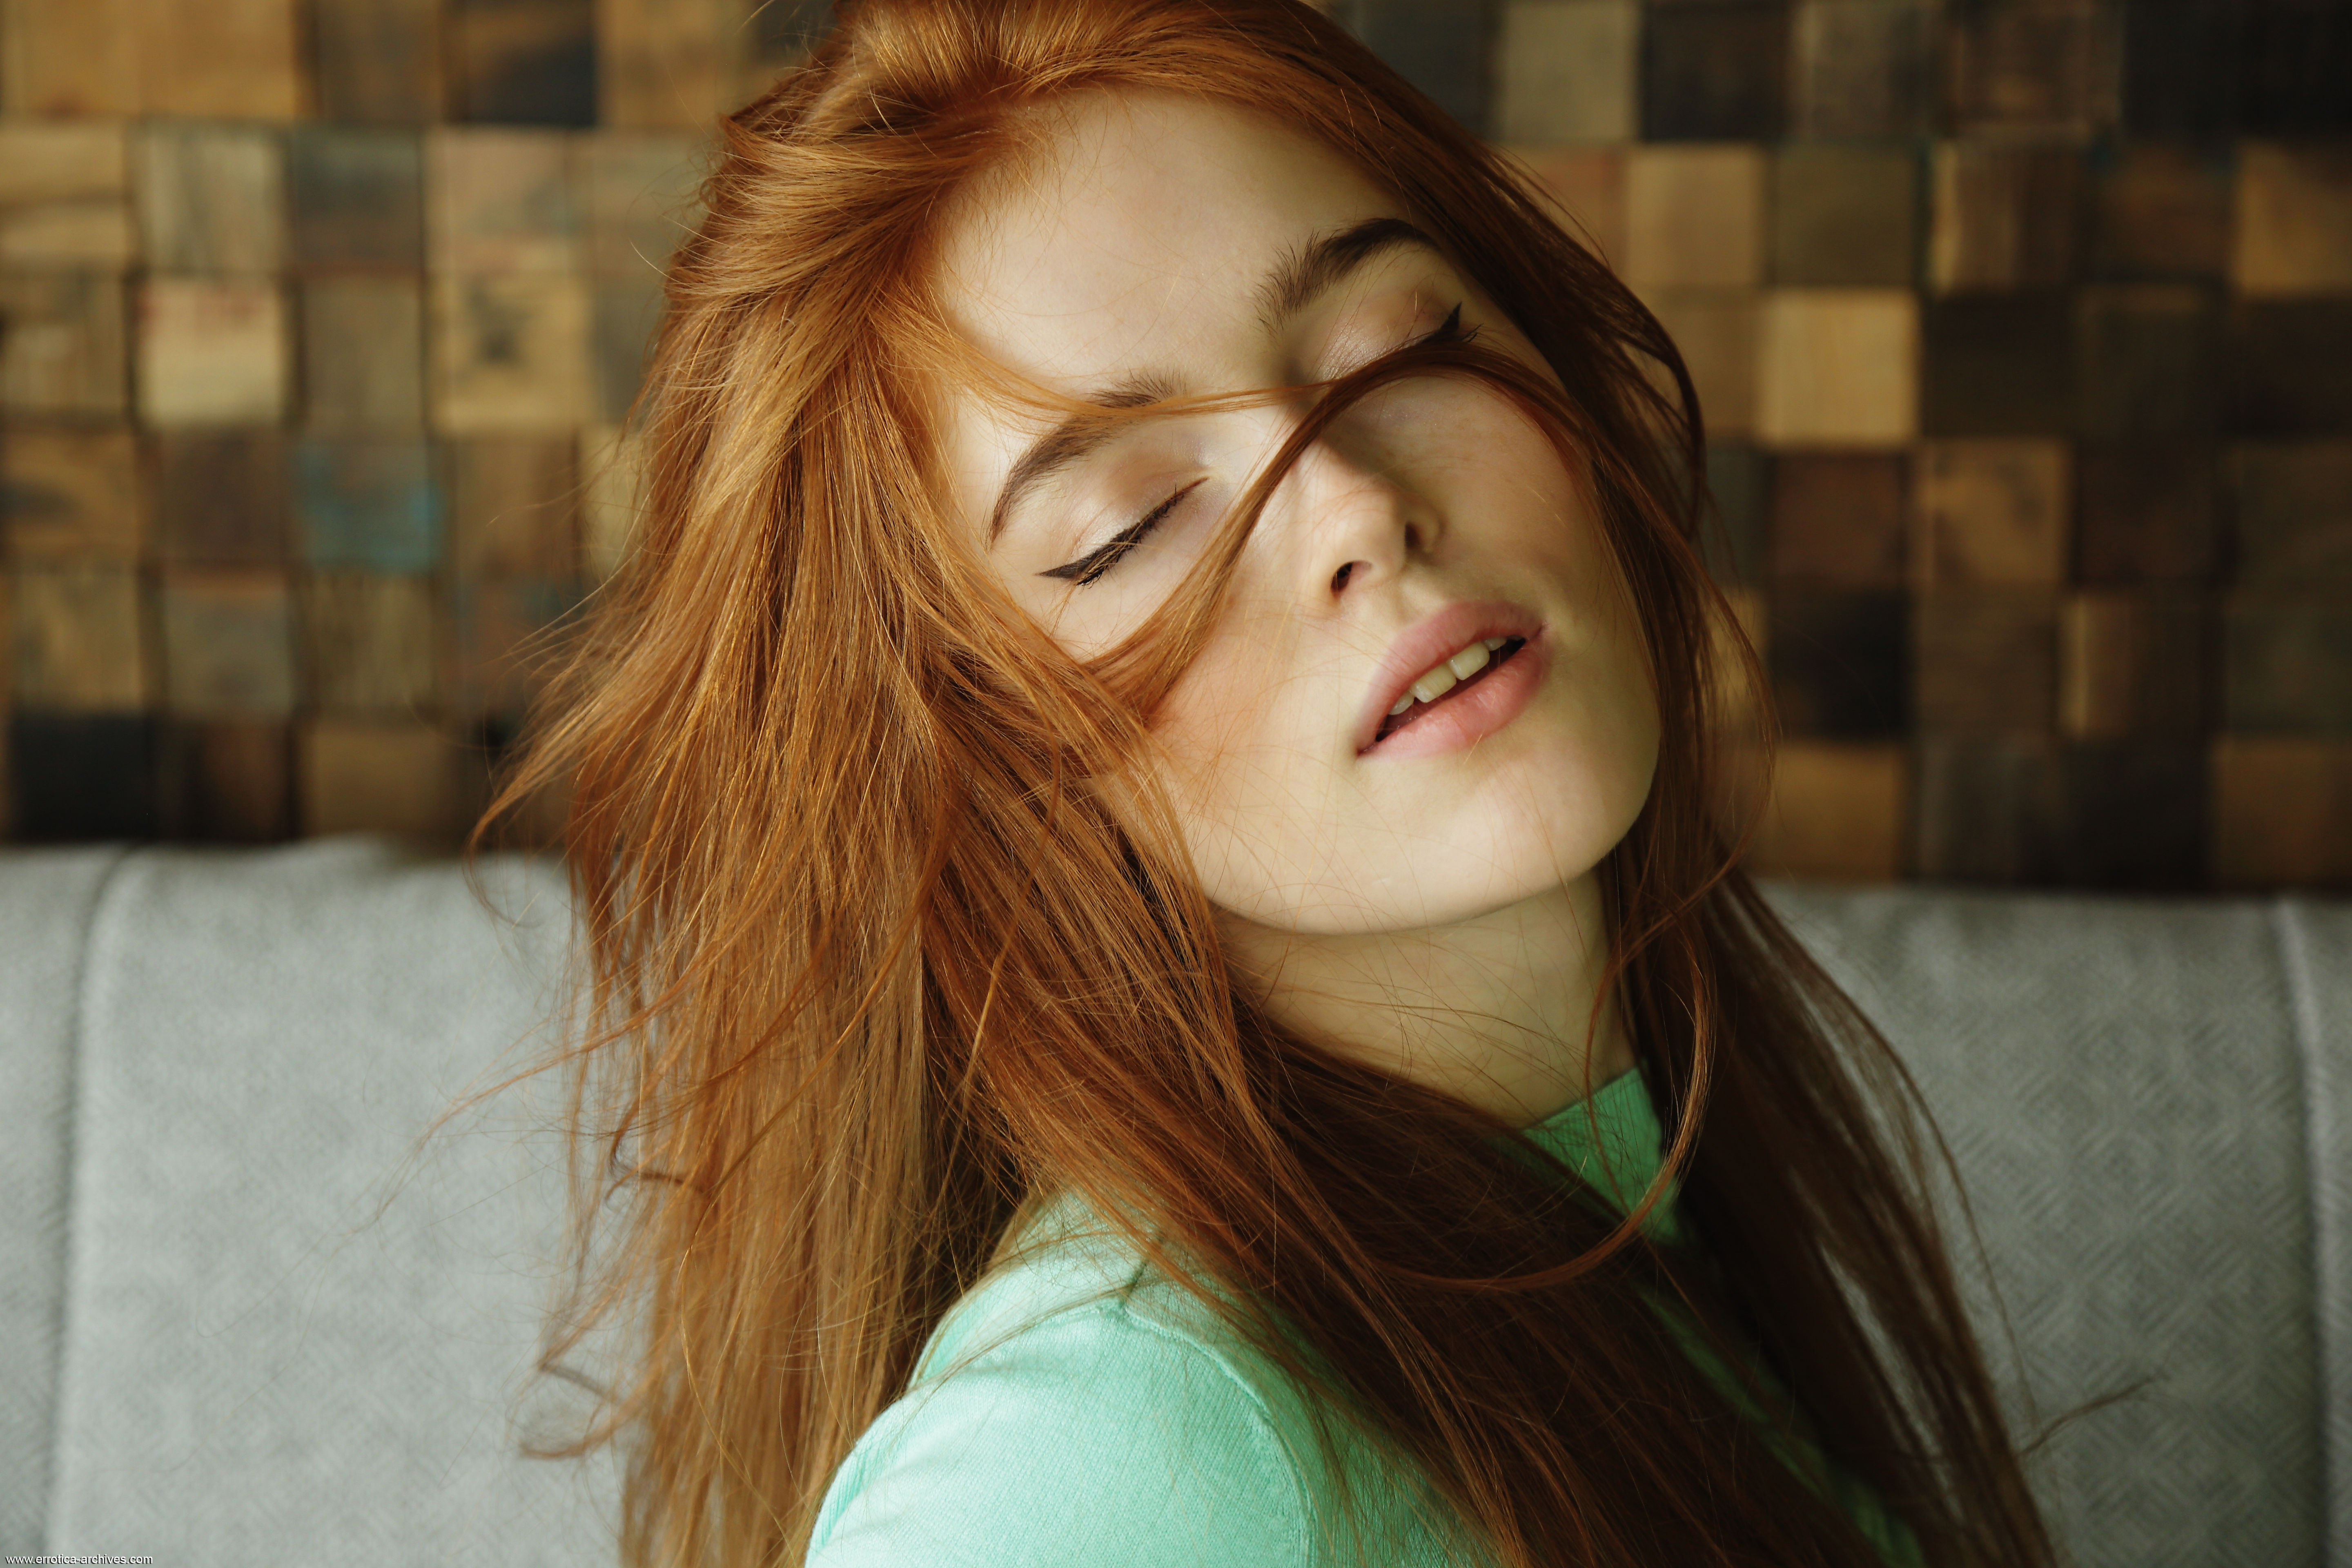 People 5760x3840 Jia Lissa redhead women model Errotica Archives pornstar freckles lustful look parted lips women indoors indoors dyed hair face closeup Russian Russian women closed eyes open mouth